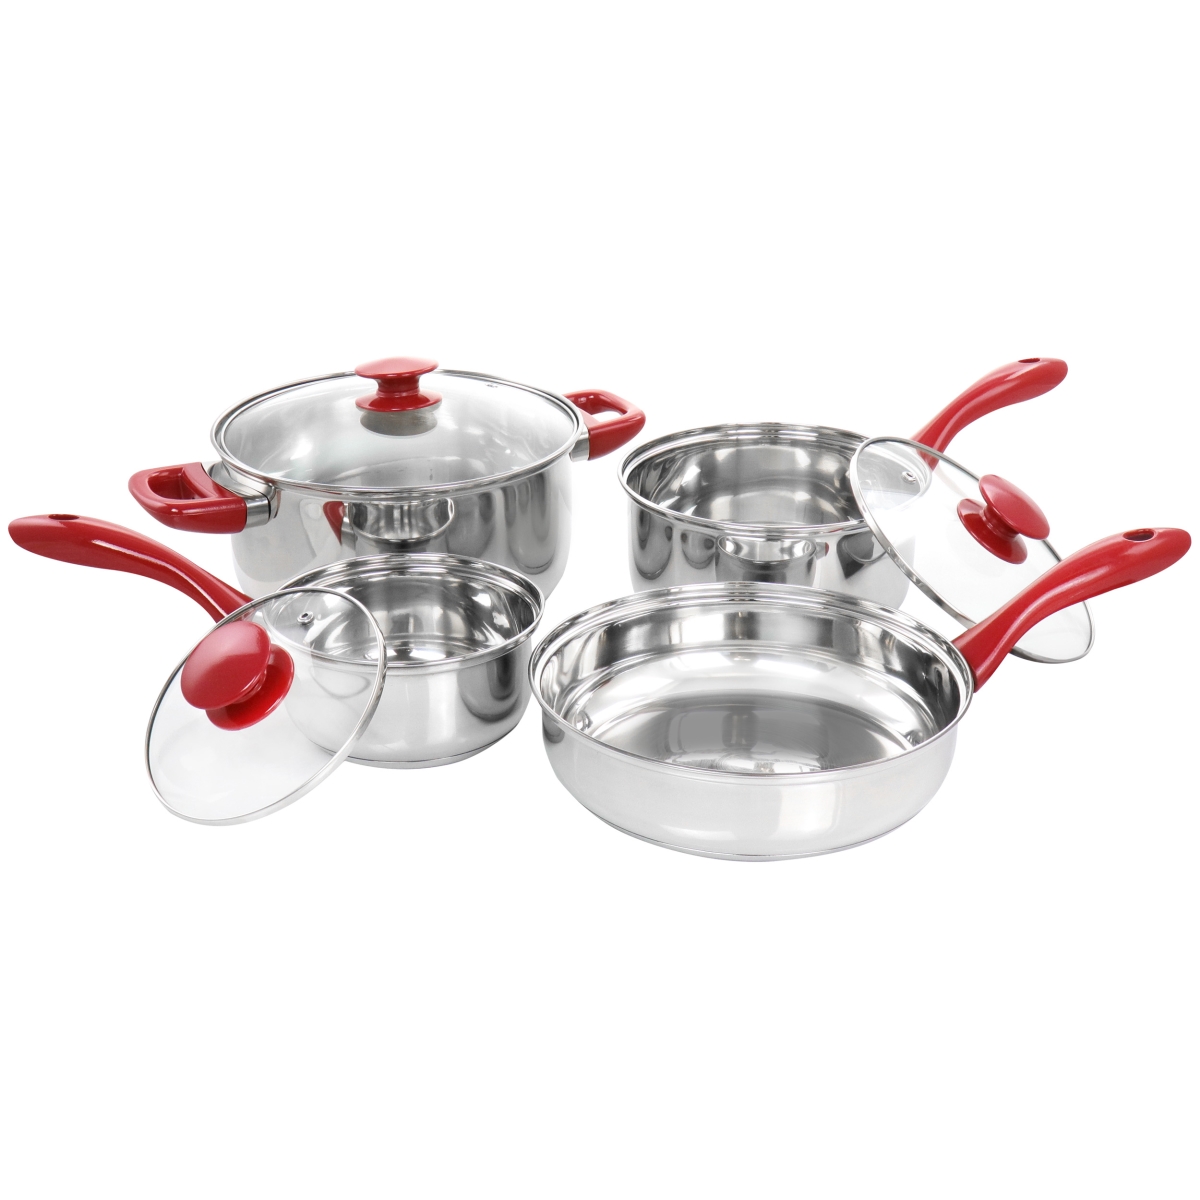 Picture of Gibson 127768.07 Crawson Stainless Steel Cookware Set with Red Handles, Chrome - 7 Piece